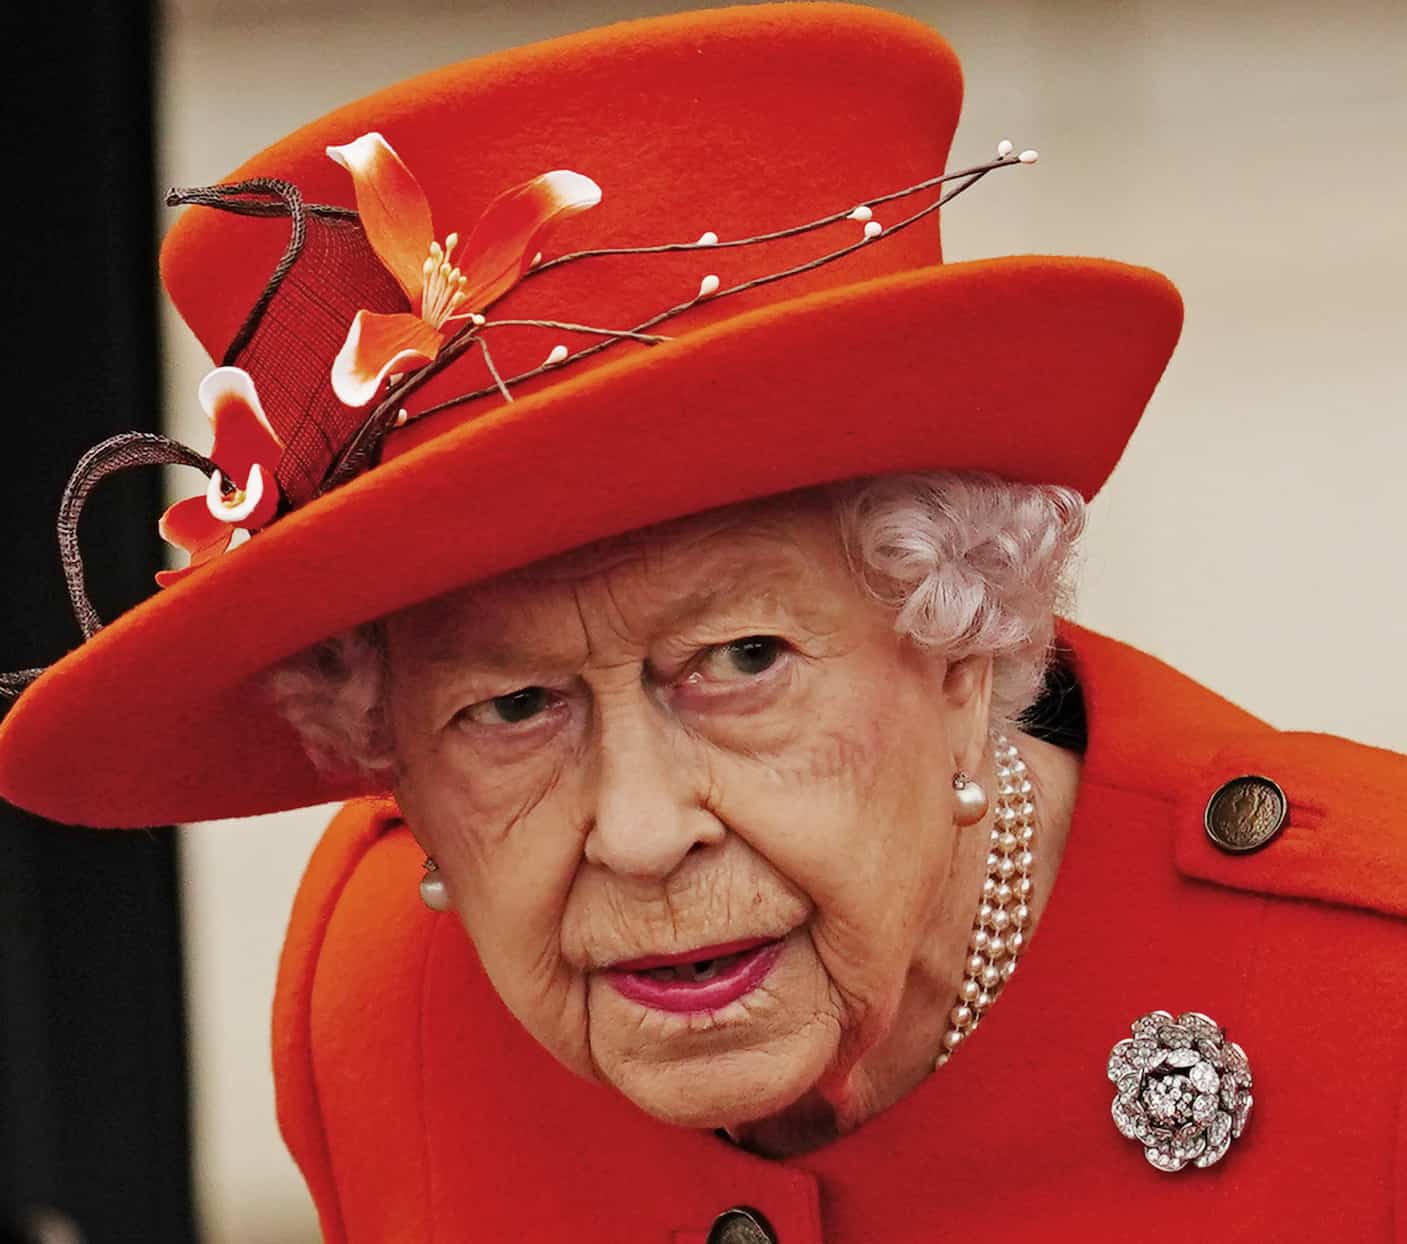 An expert prediction about the Queen left many shaking their heads